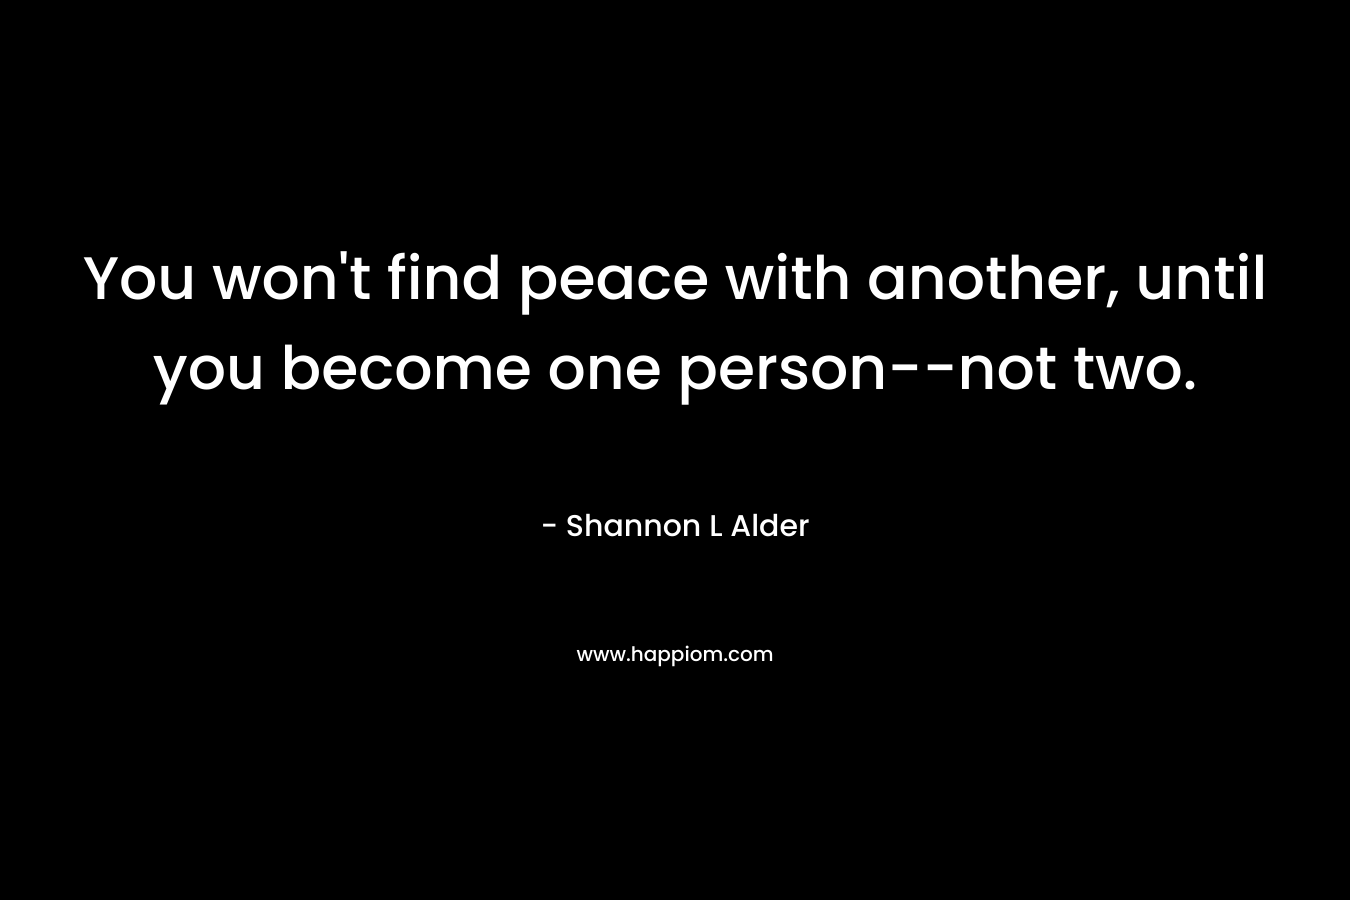 You won't find peace with another, until you become one person--not two.